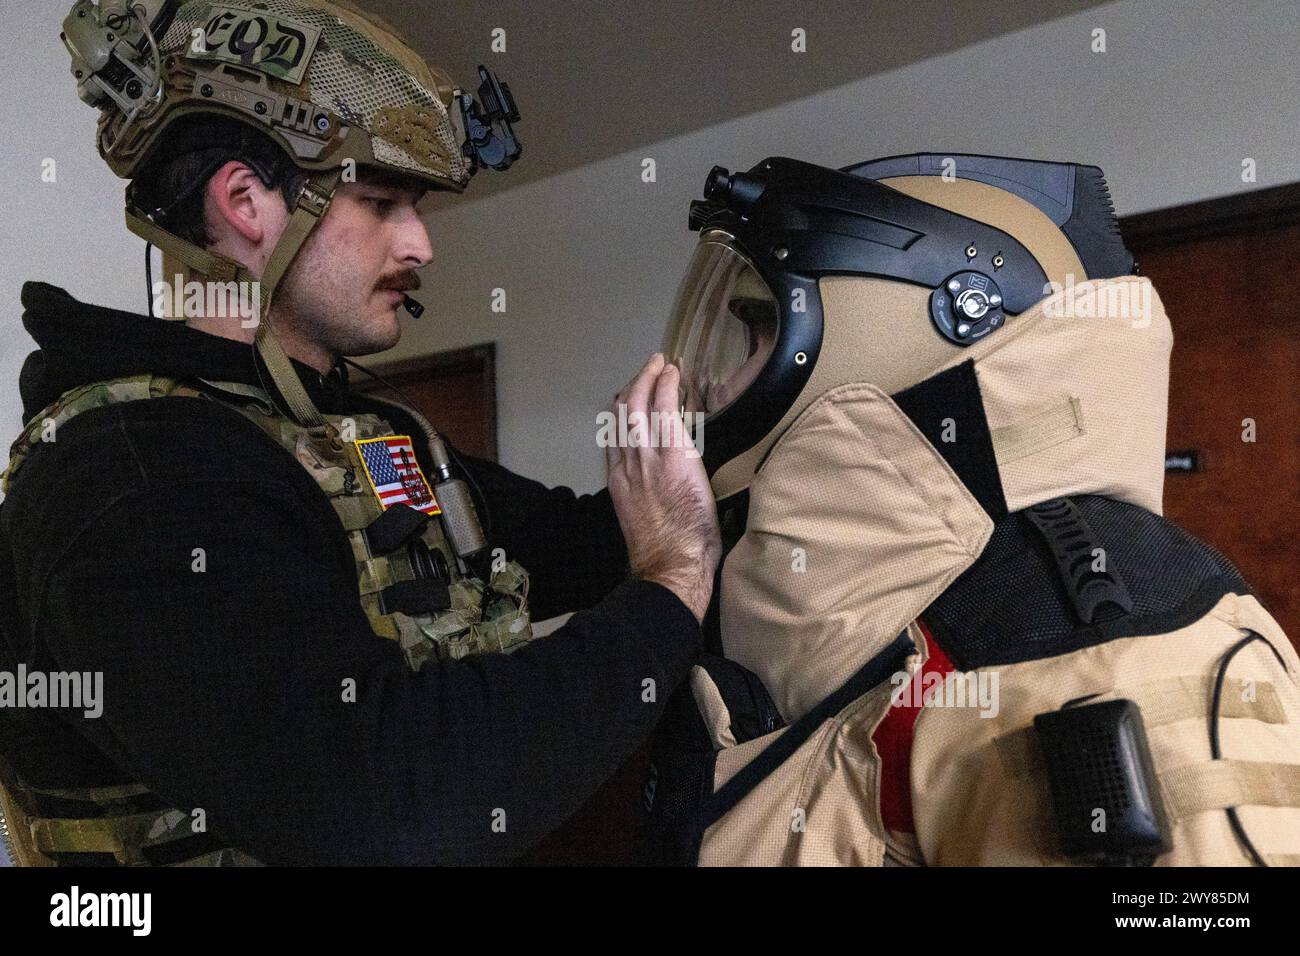 Mar 27, 2024 - Trenton, New Jersey, USA - U.S. Air Force Airman 1st Class Robert Wittig, left, closes the helmet on Senior Airman Russell J. Bongiovanni's EOD-10E bomb suit, both explosive ordnance disposal technicians with the 177th Fighter Wing, New Jersey Air National Guard, during the Joint Chemical, Biological, Radiological, Nuclear, and High Yield Explosives Characterization, Exploitation, and Mitigation Course JCCEM at the CURE Insurance Arena with FBI; New Jersey State Police, and members of the Delaware and Idaho WMD-CSTs were trained by the Eniwetok Group, LLC (EGL). (Credit Image: © Stock Photo